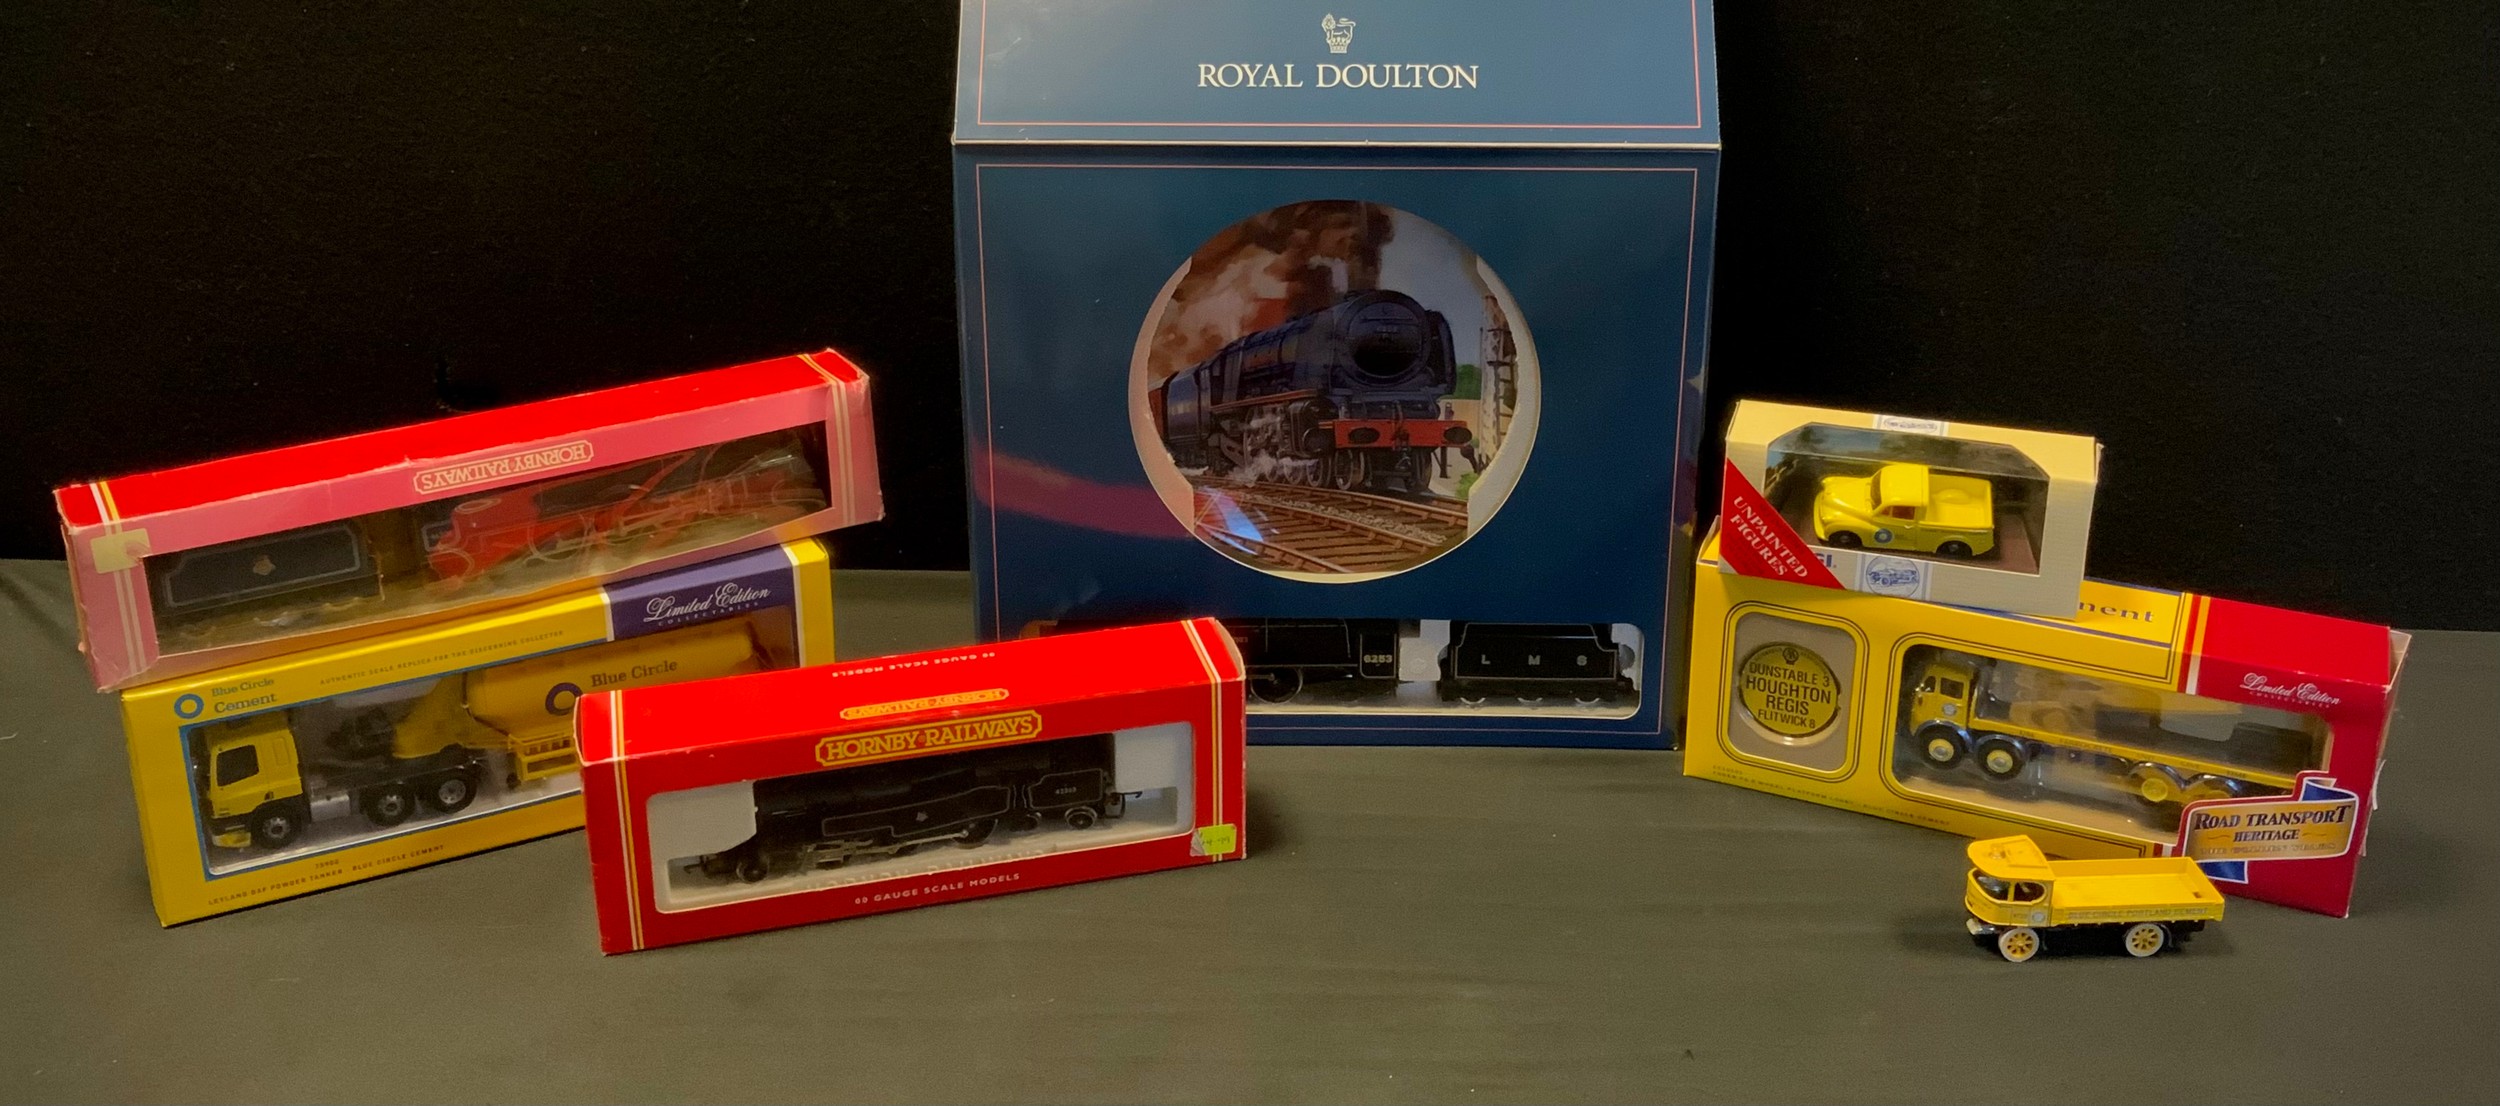 Hornby royal Doulton time for a change 50th edition collector’s plate; 00 gauge Br locomotive, 00